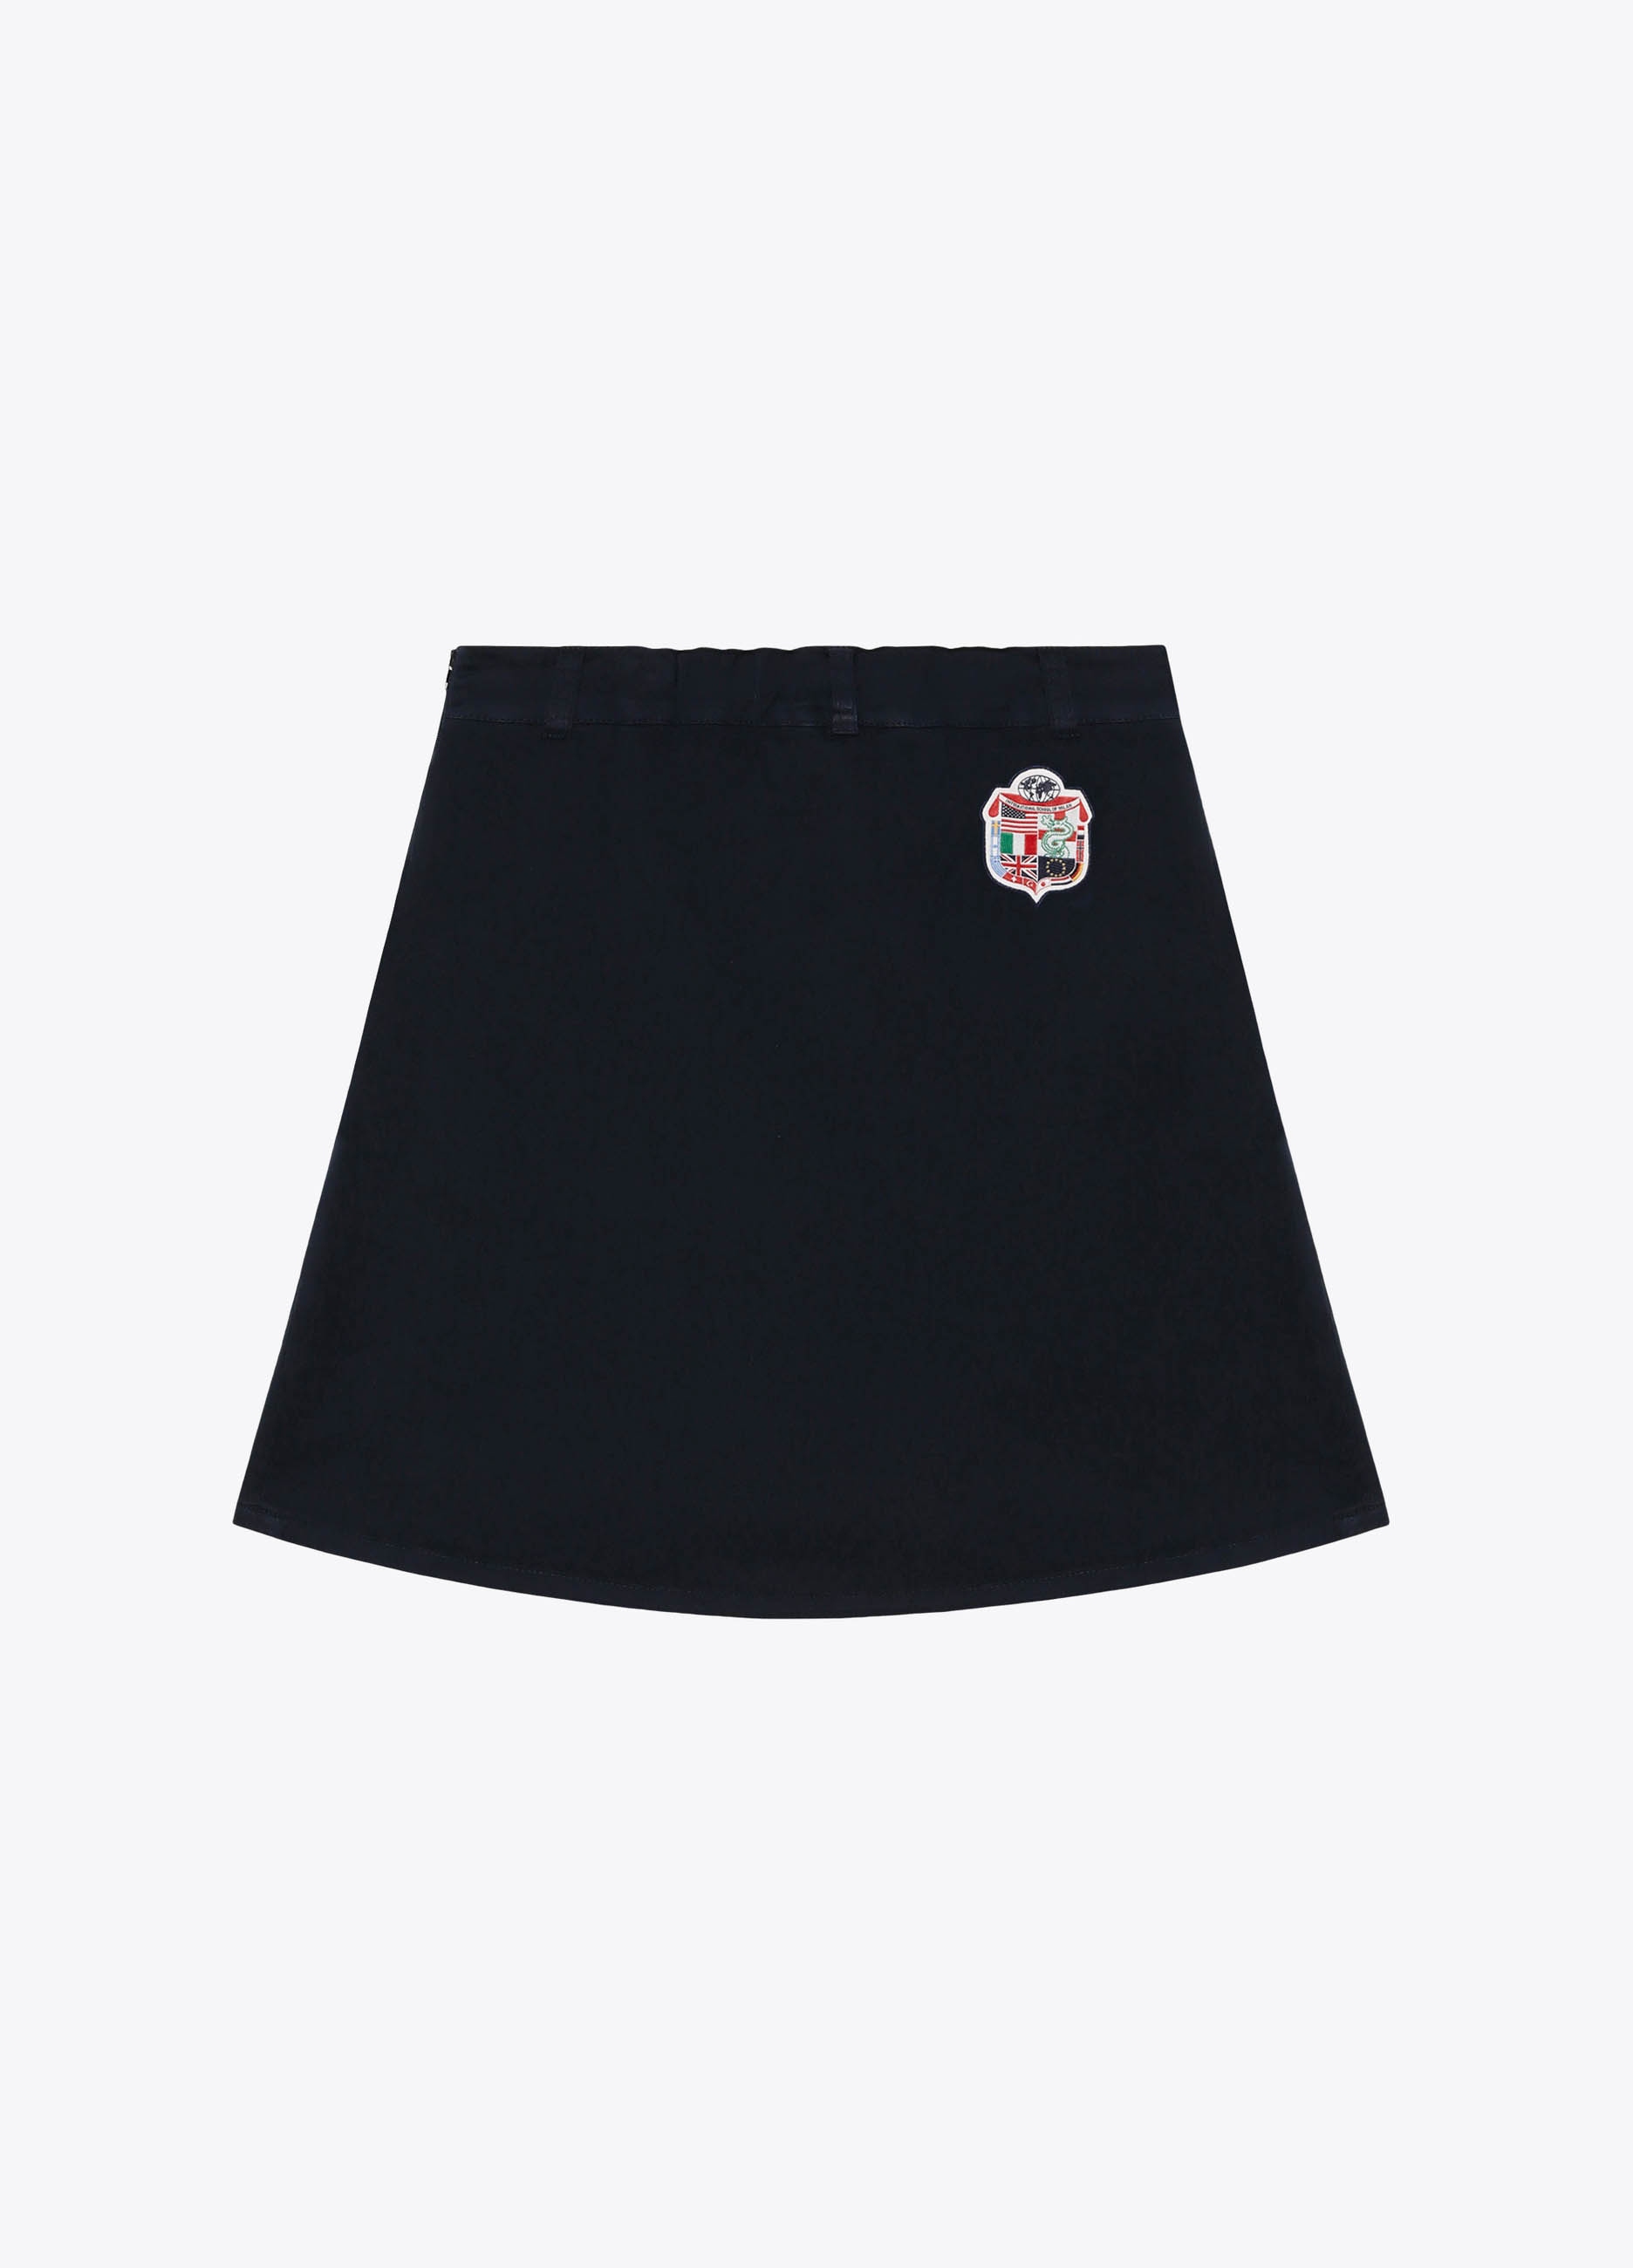 GIRL - Cotton twill skirt with internal shorts.